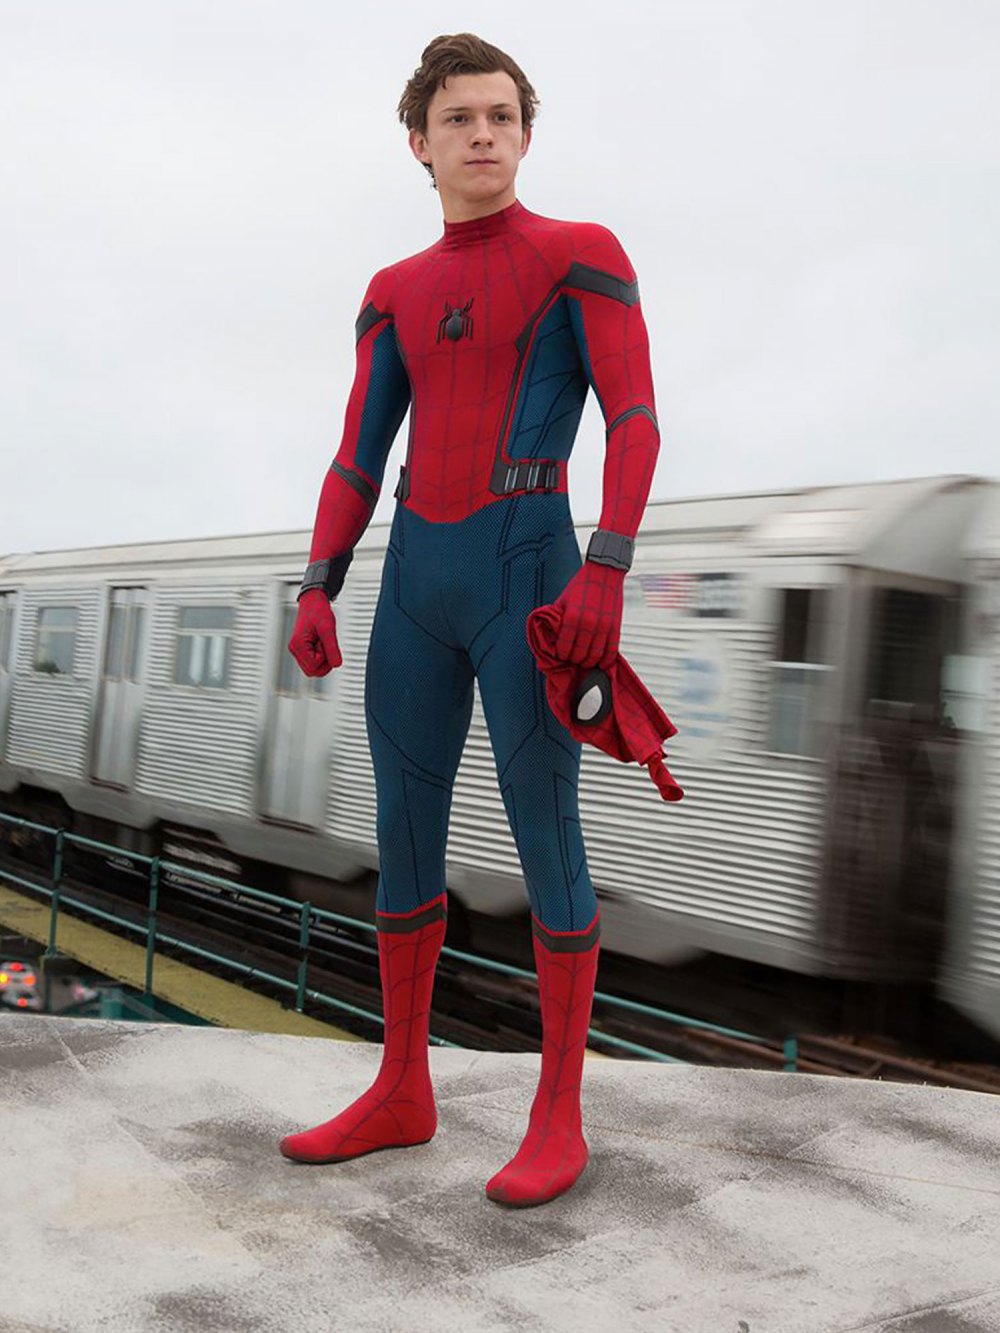 Andrew Garfield doesn't care if fans love another Spider-Man more than him, Tom Holland